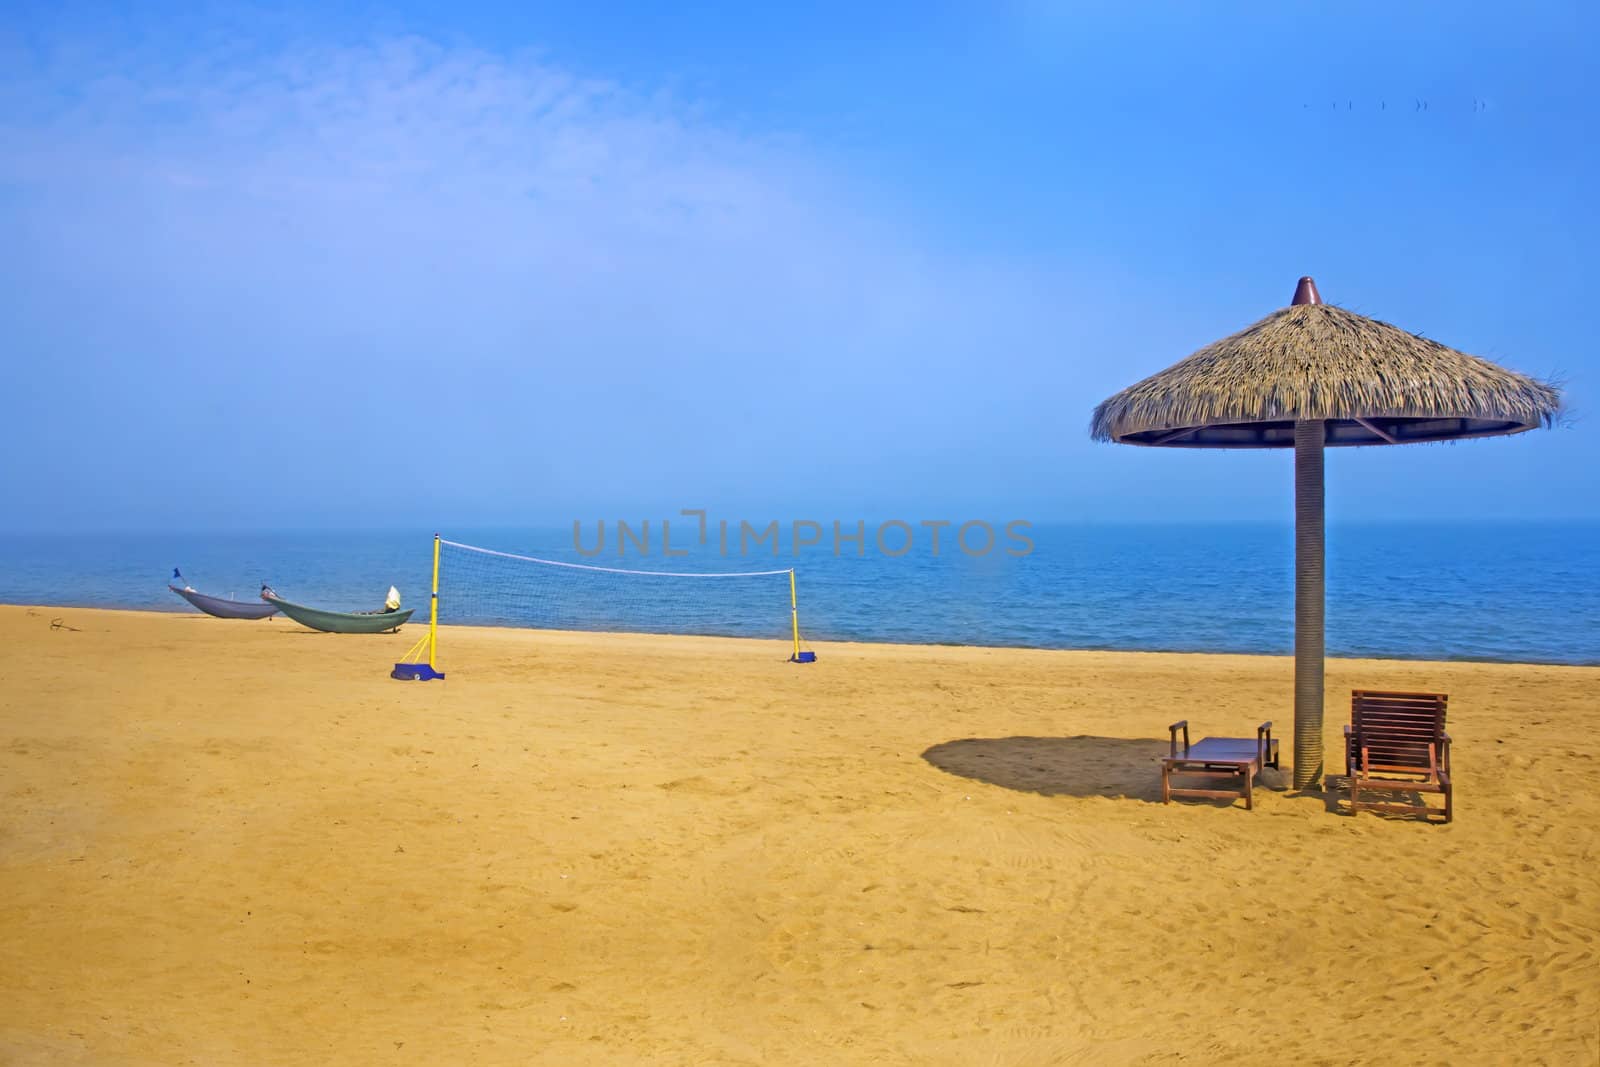 Sea beach casual background image by xfdly5